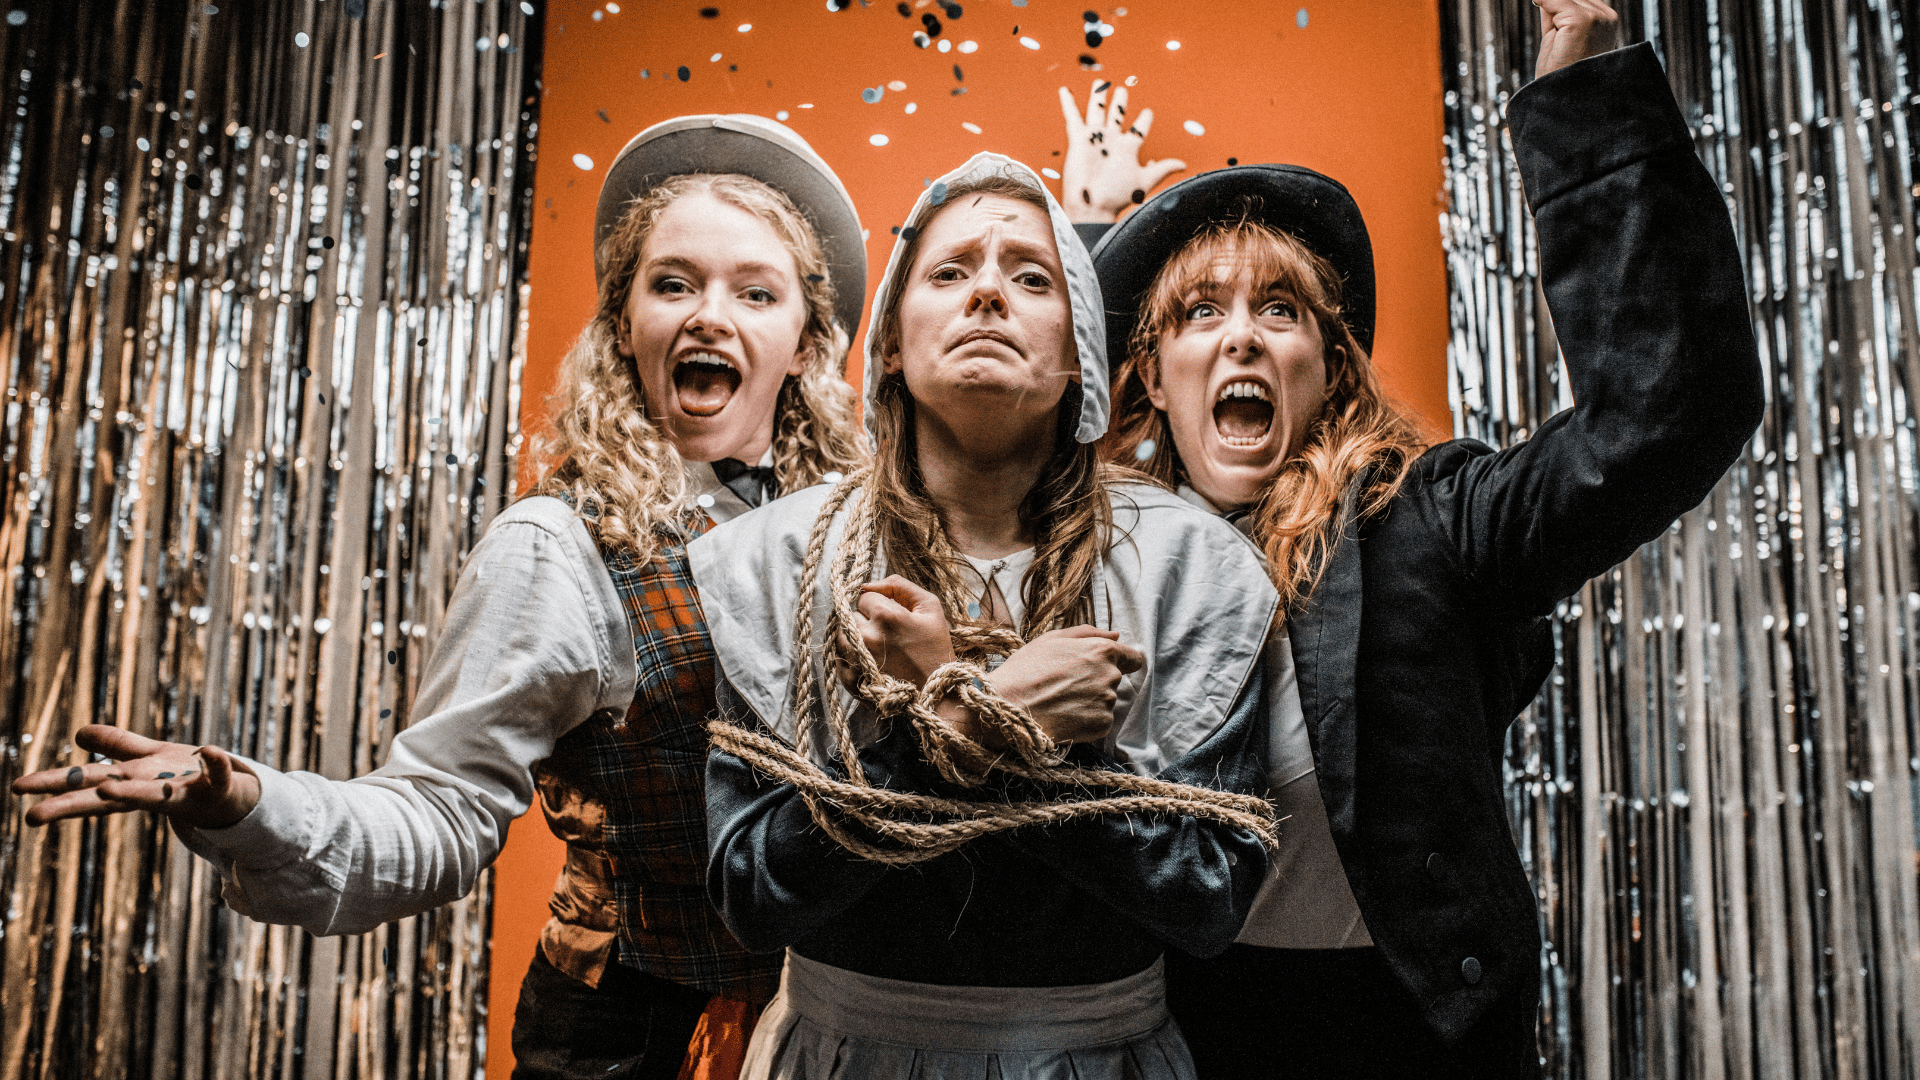 Hags: A Magical Extravaganza artwork. Three young women (left and right, dressed as stage magicians; centre, dressed as a medieval peasant and bound with a rope) stand between two tinsel curtains against an orange background. The two women dressed as magicians have shocked expressions and the woman dressed as a peasant looks worried.